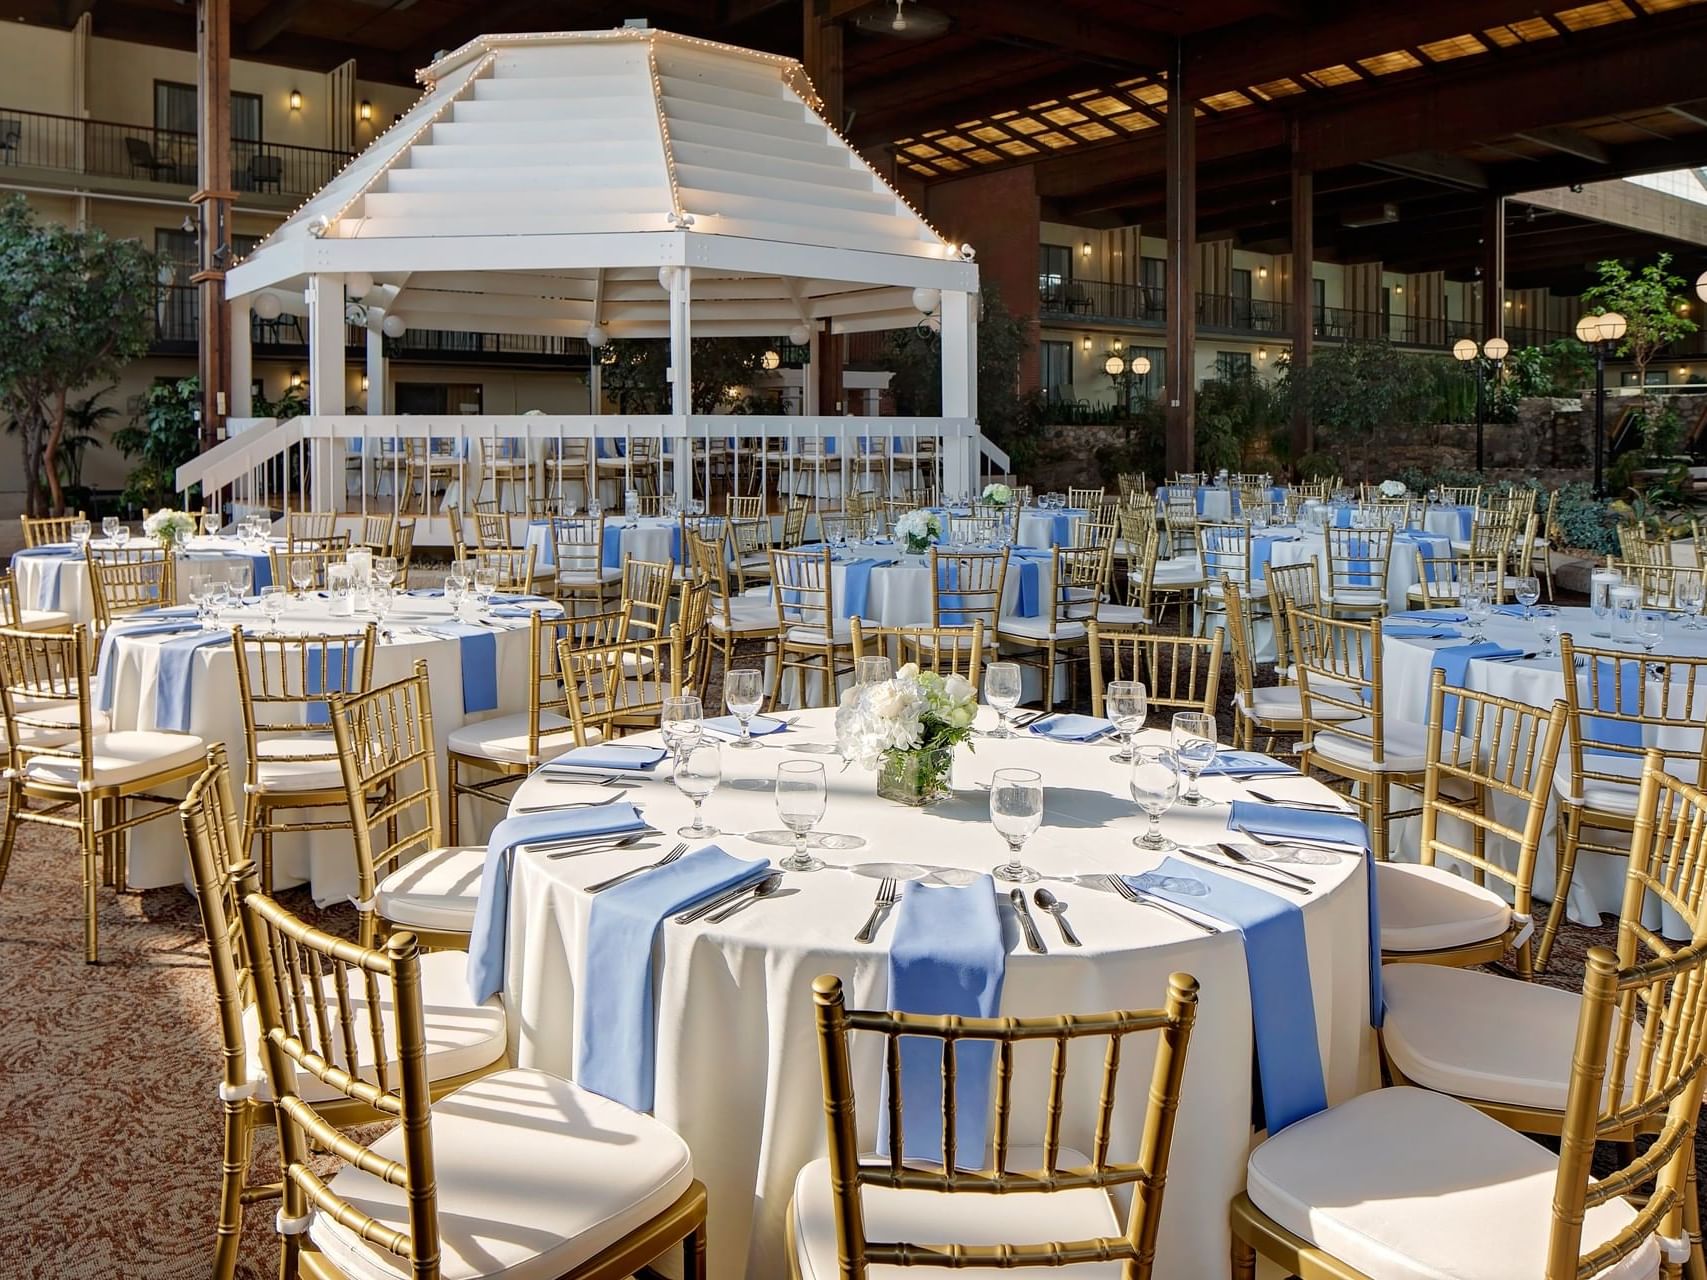 Banquet dining set-up in Courtyard venue at Boxboro Regency